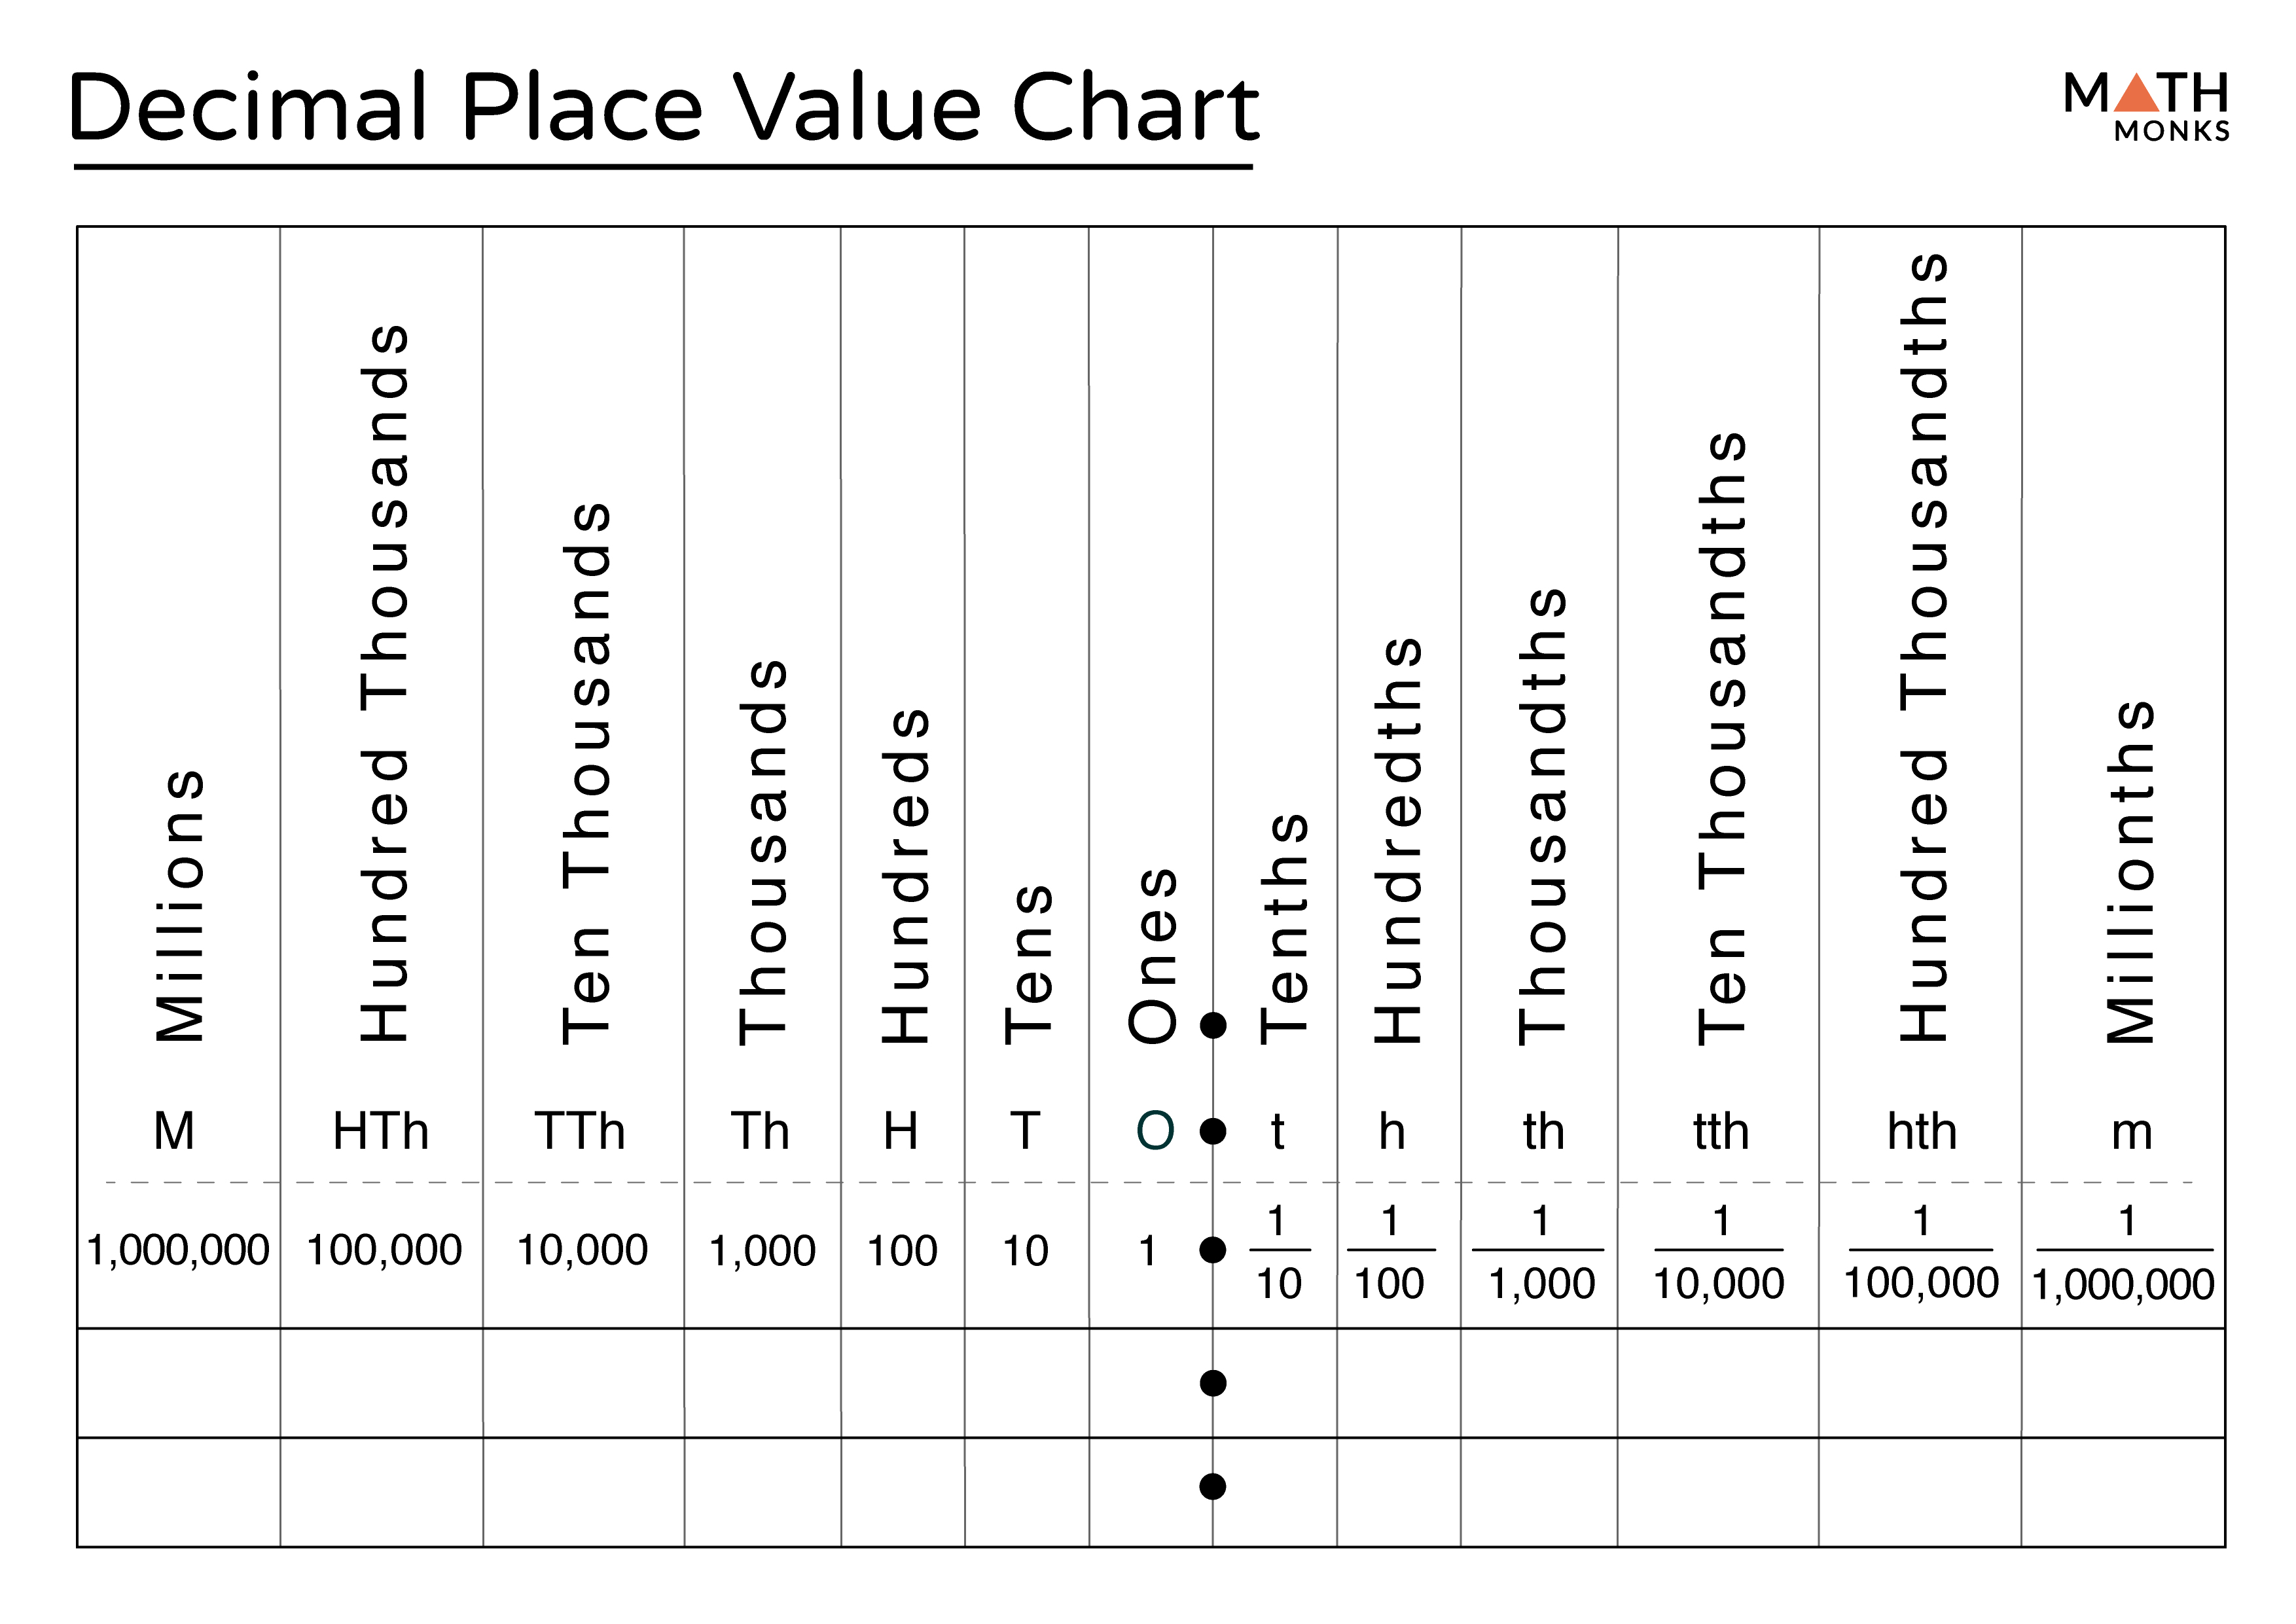 Decimal Place Value Definition, Chart & Examples